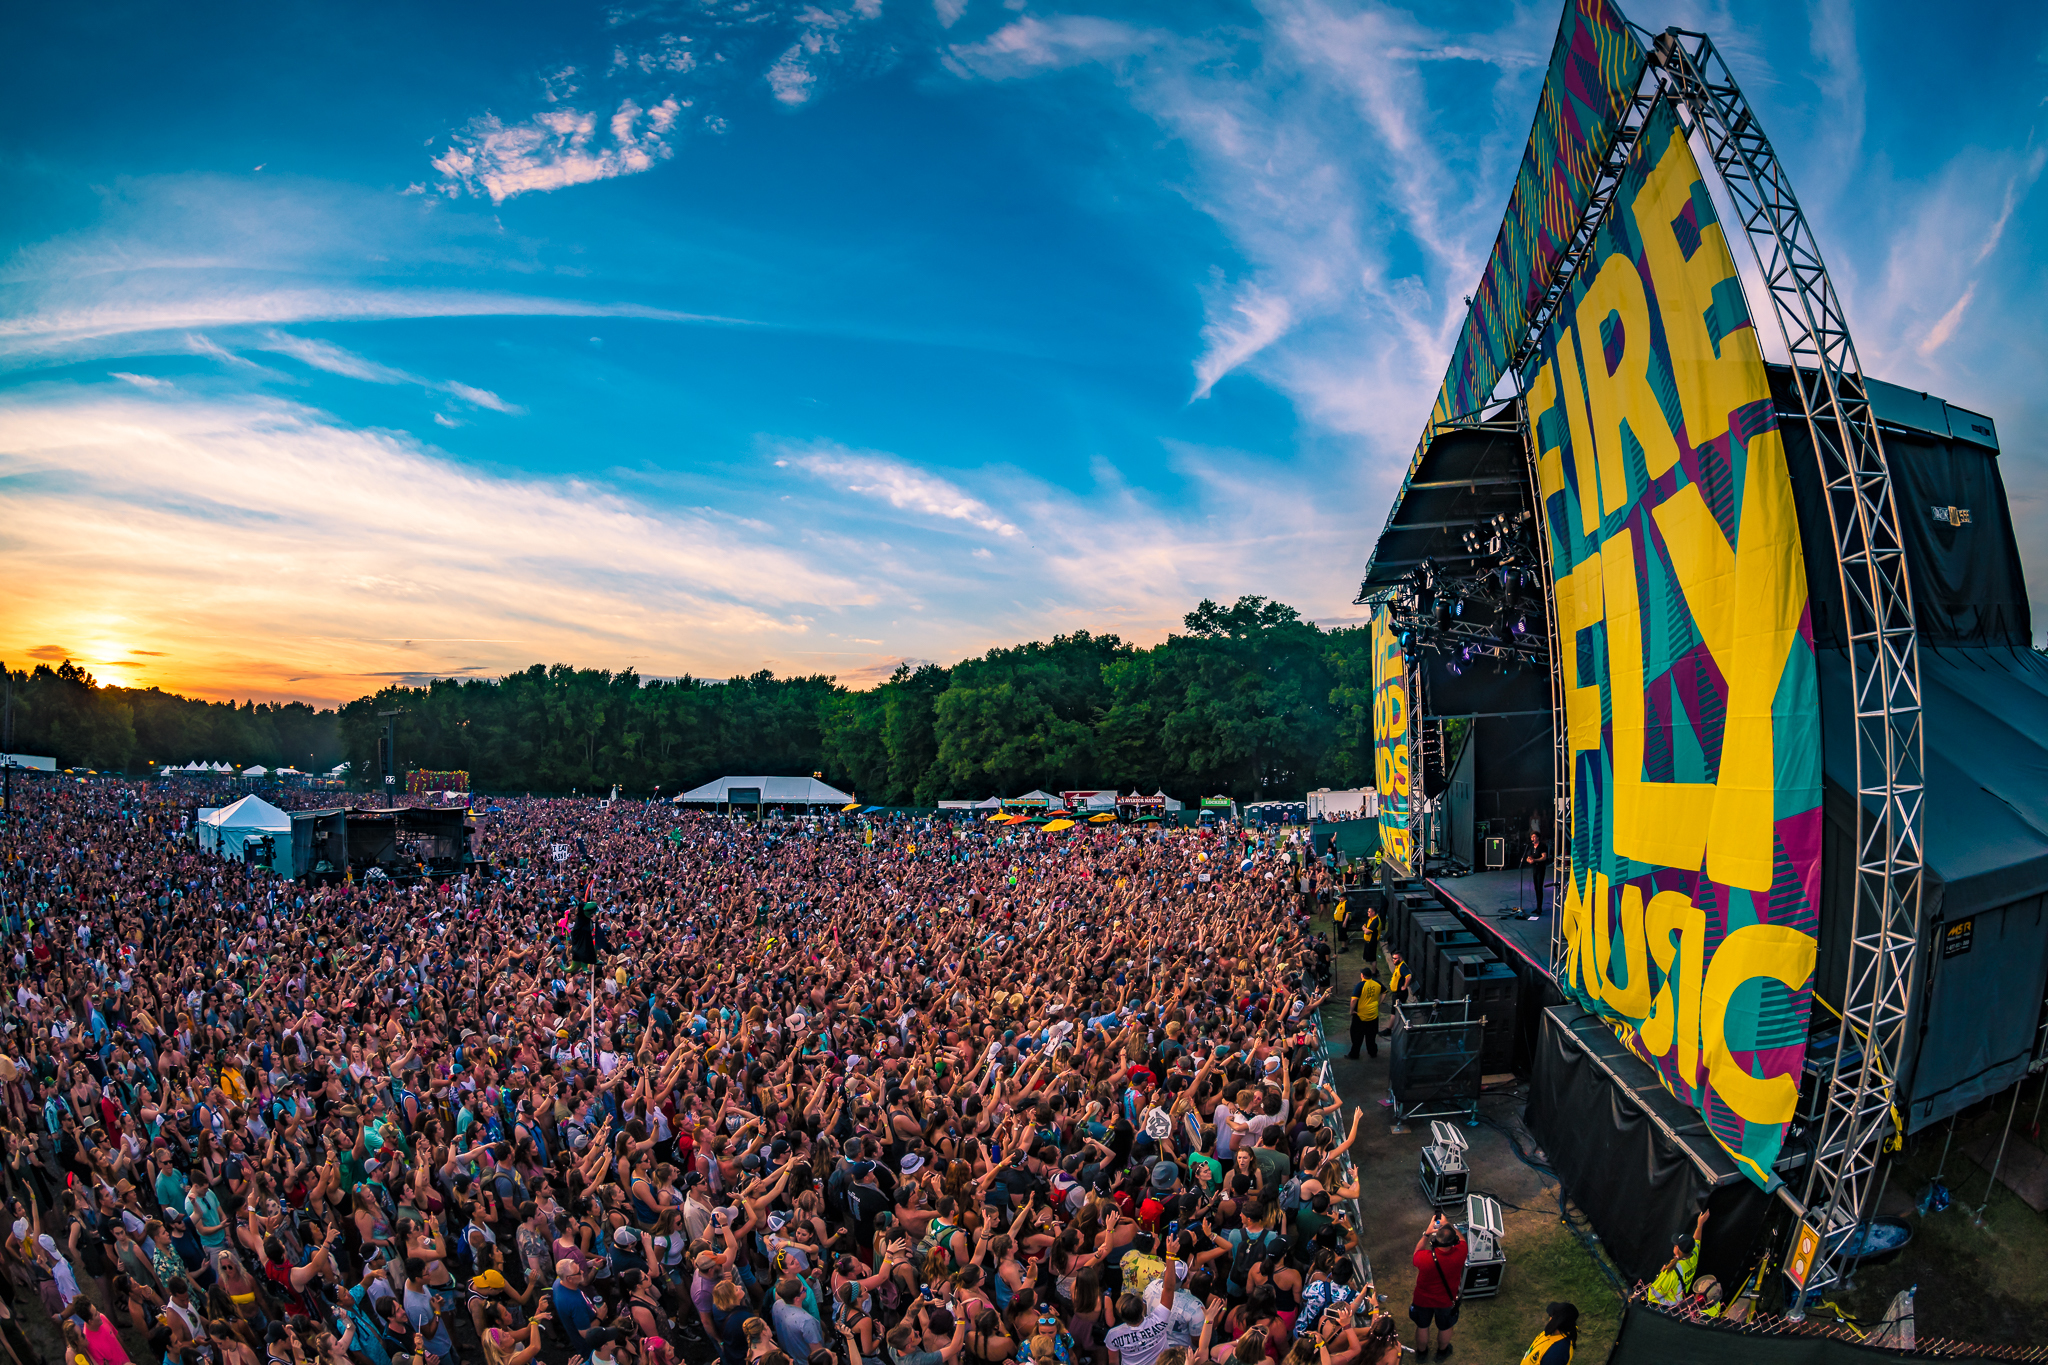 AEG Presents Acquires Remaining Shares of Firefly Music Festival | Business  Wire